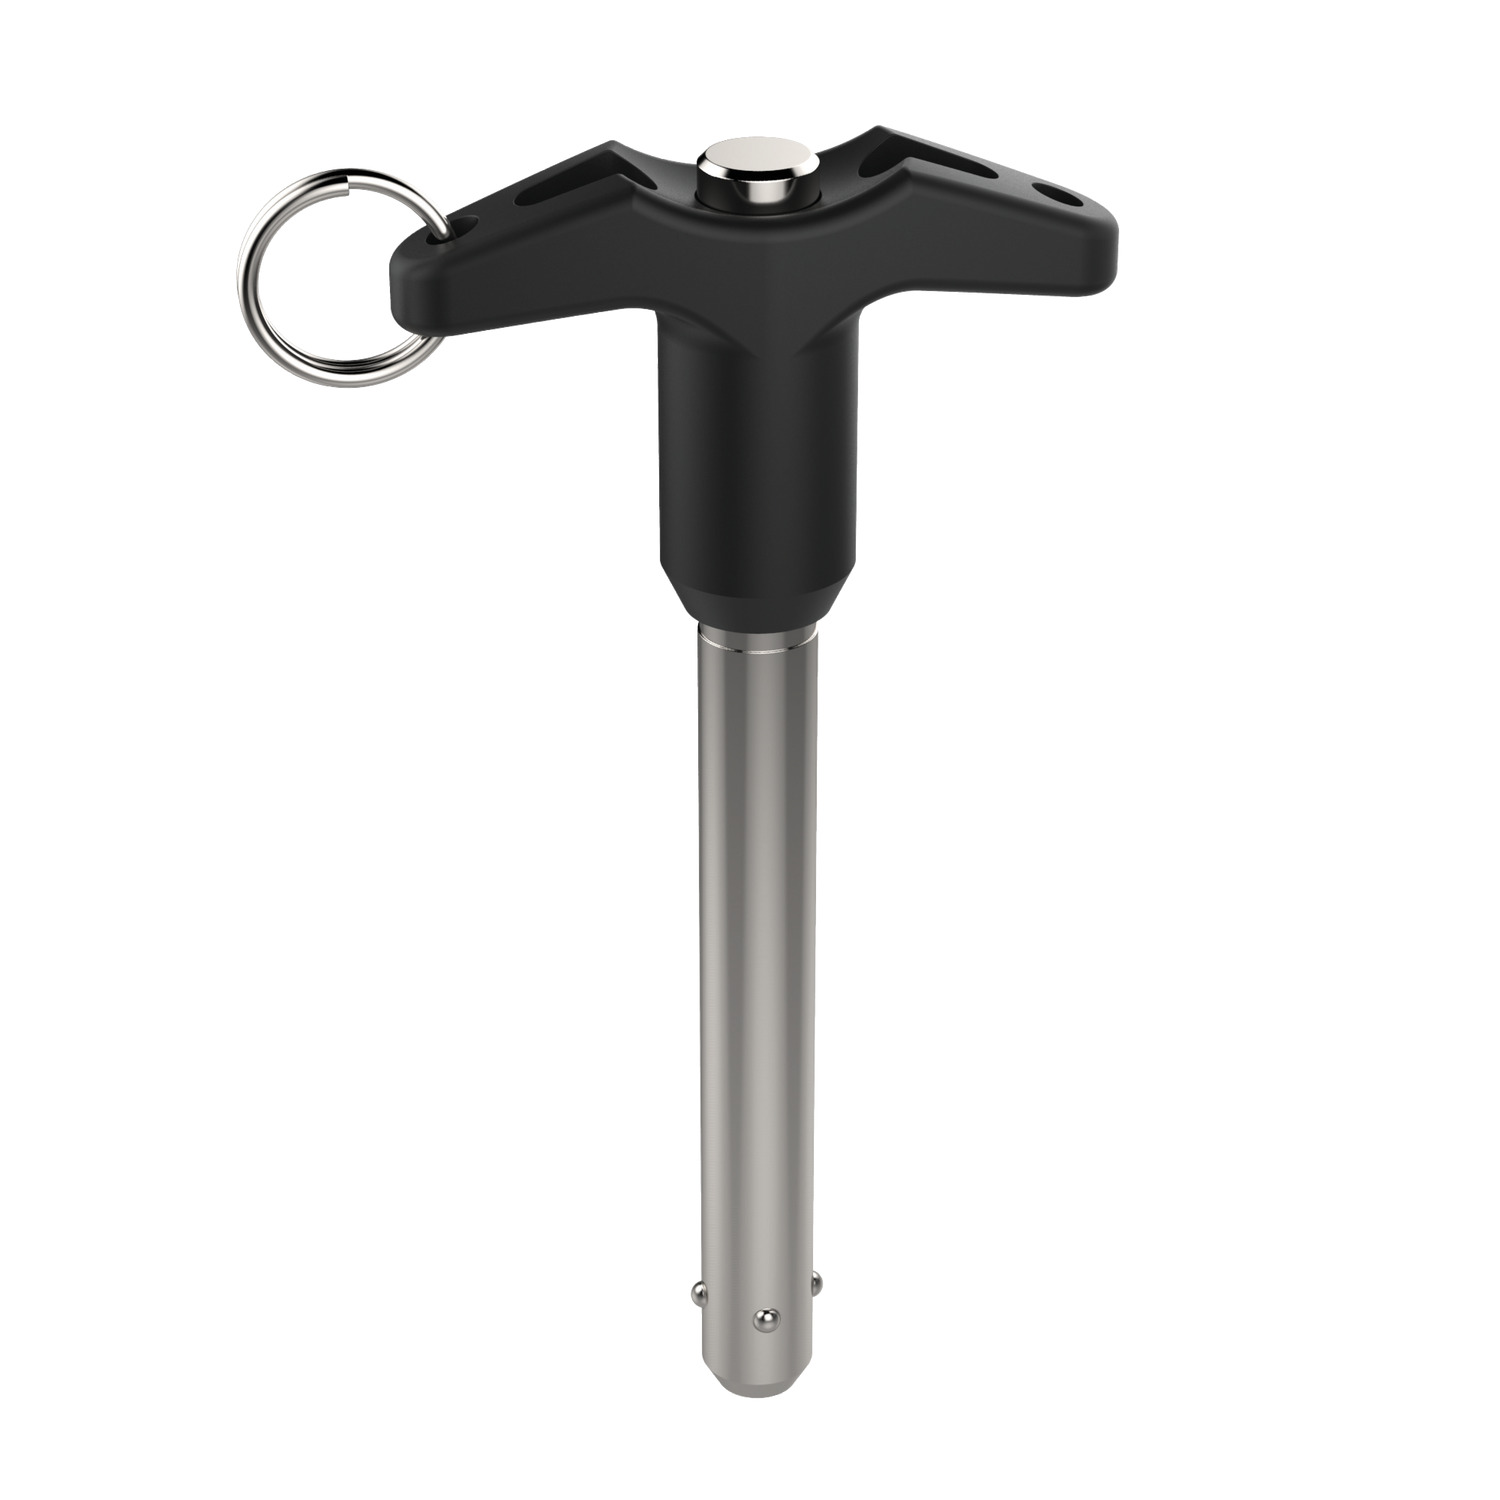 Product 33610, Aviation Pip-Pin - Standard T-Handle single acting - quick release pins - according to NASM 17985 / 